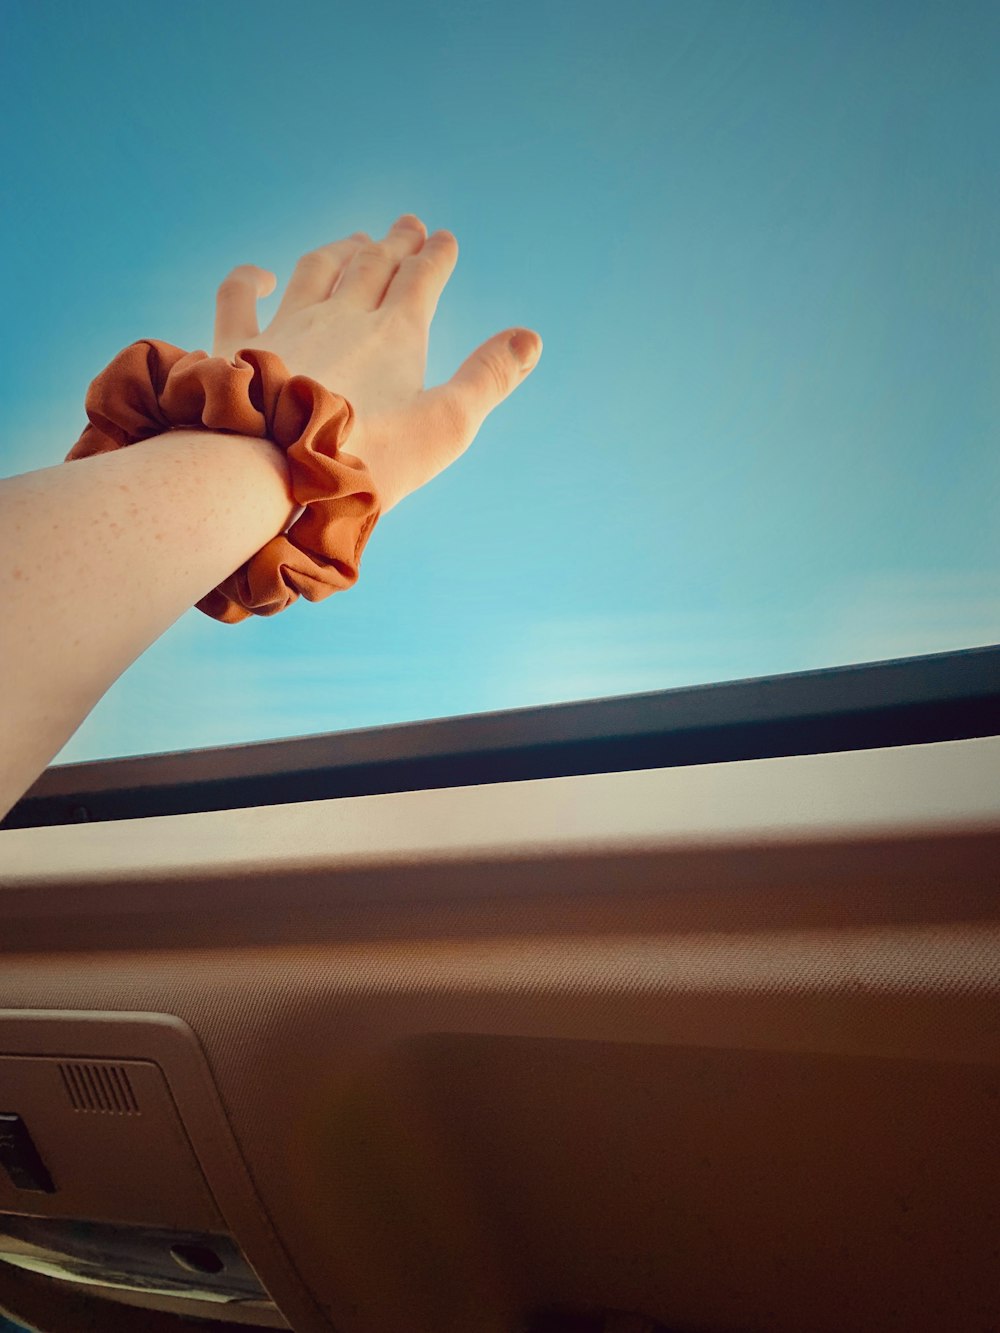 persons left hand on car dashboard